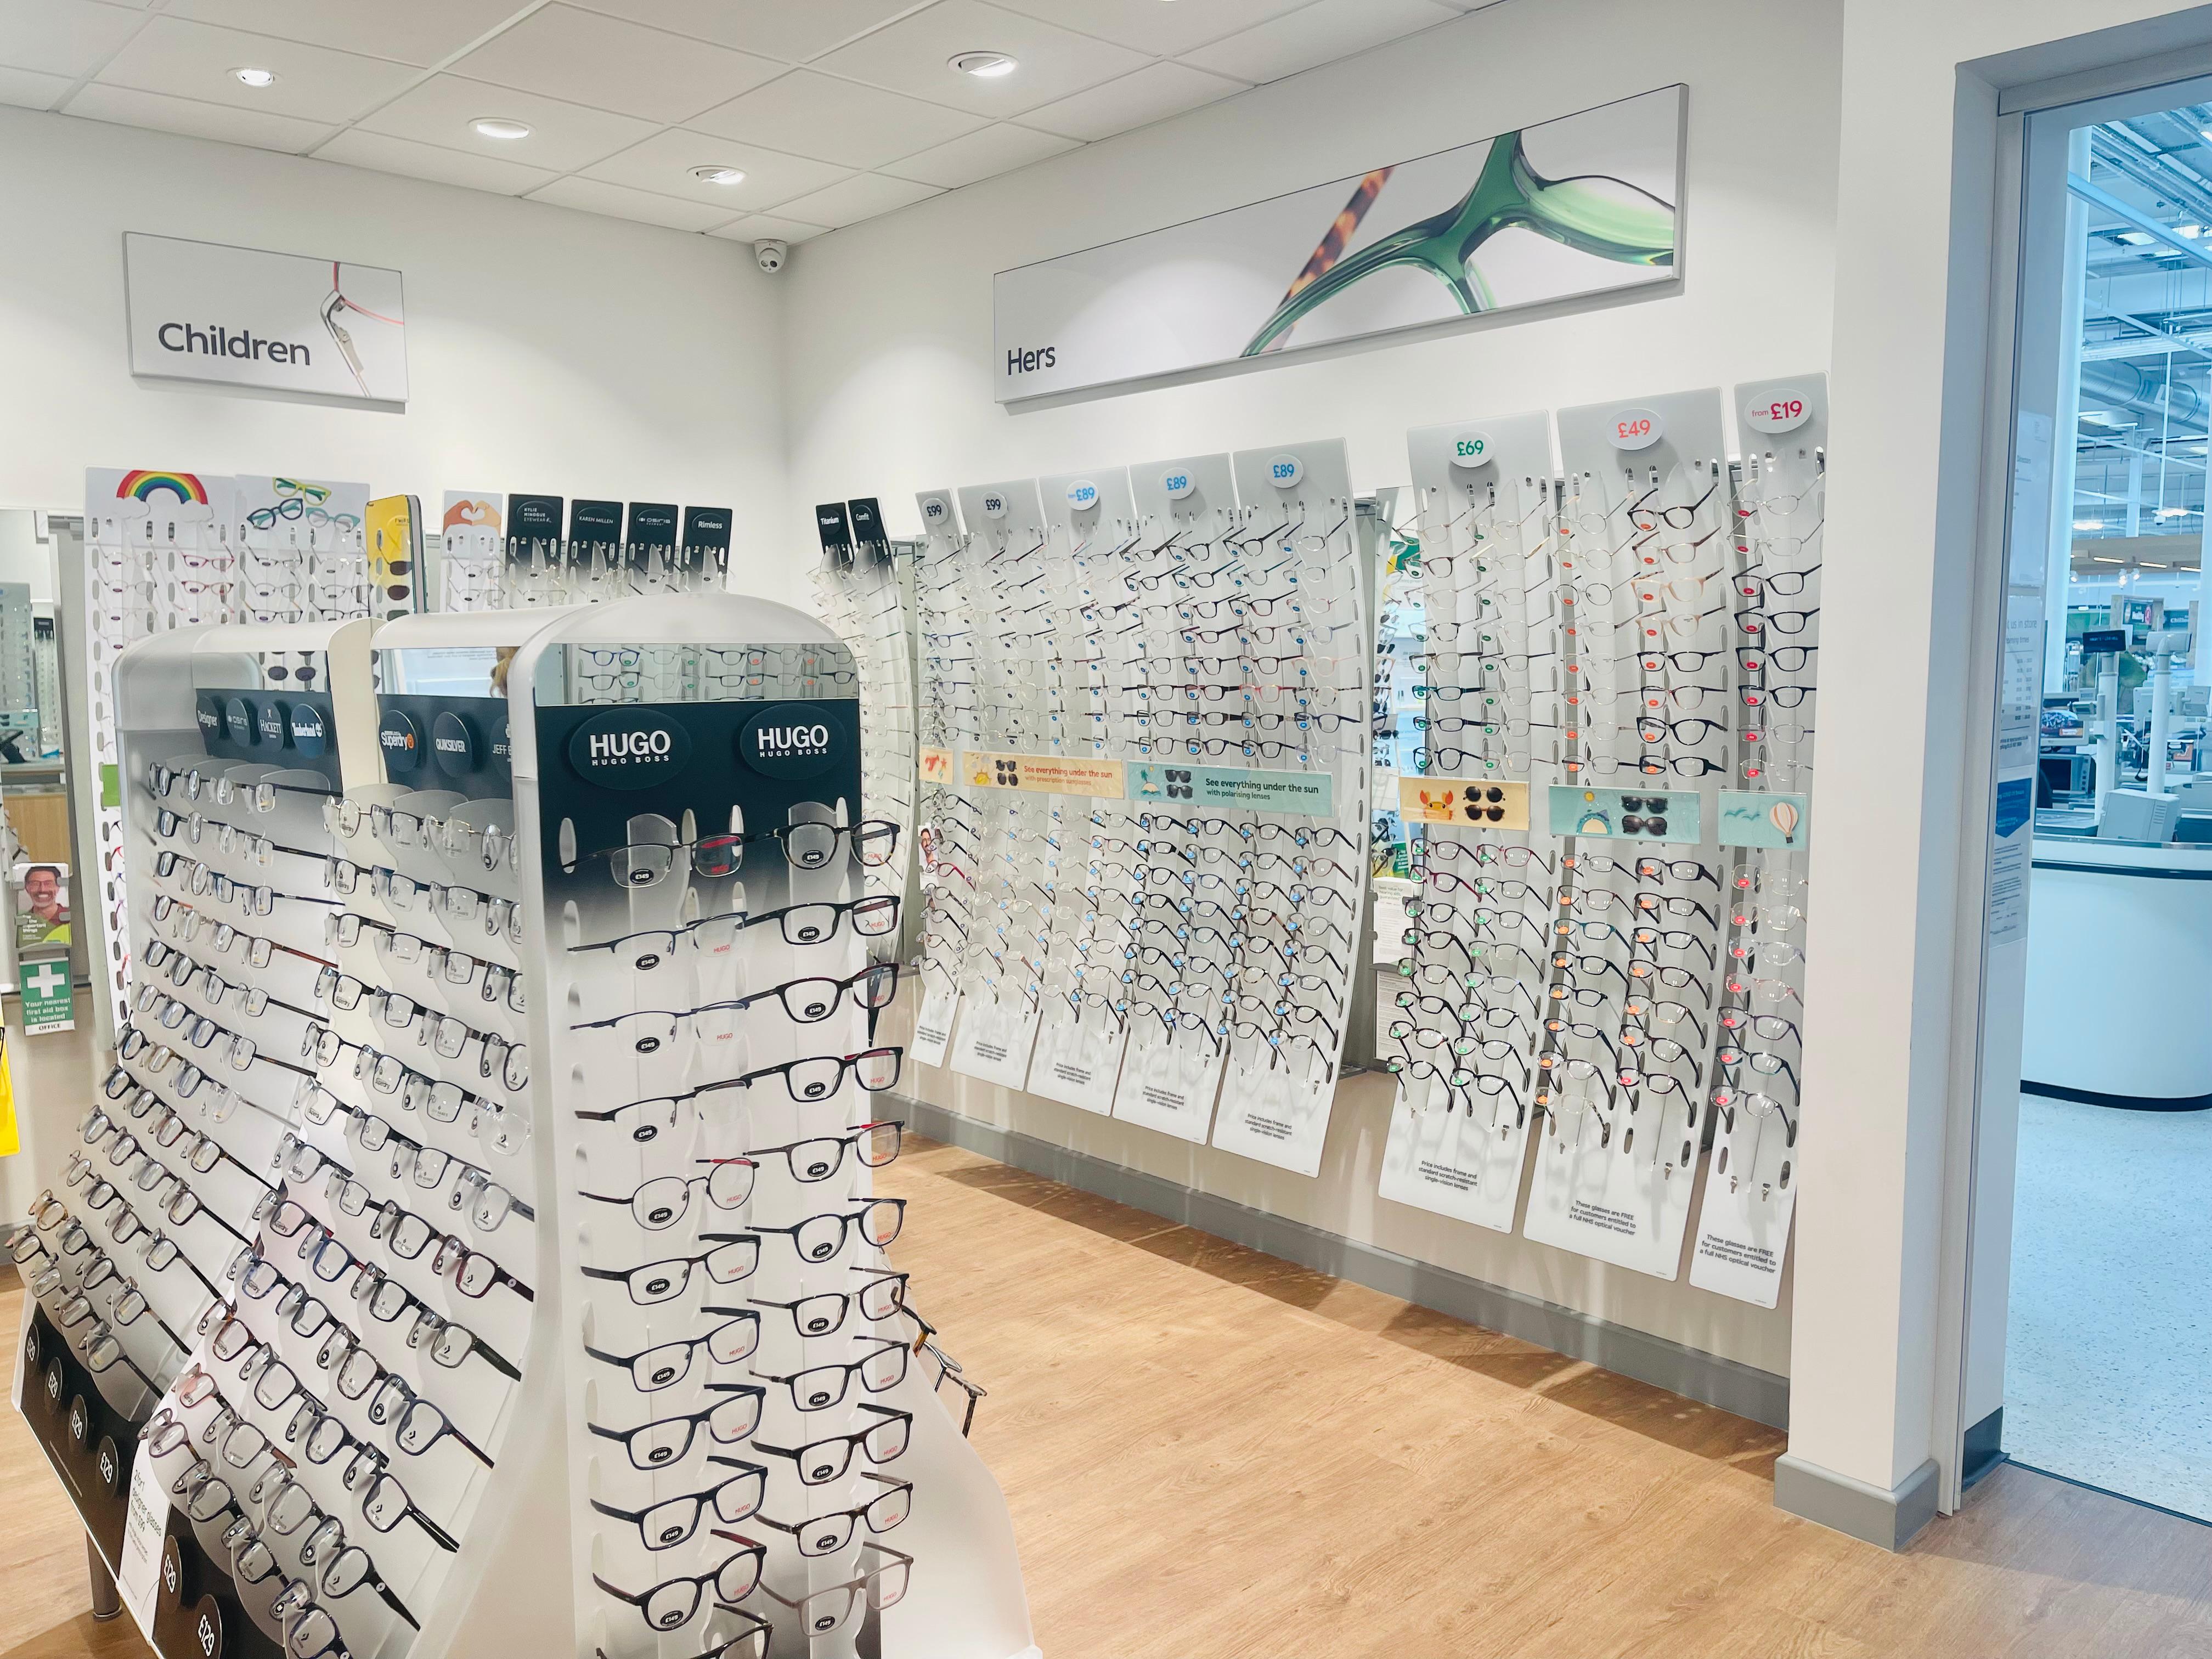 Images Specsavers Opticians and Audiologists - Colwick Sainsbury's